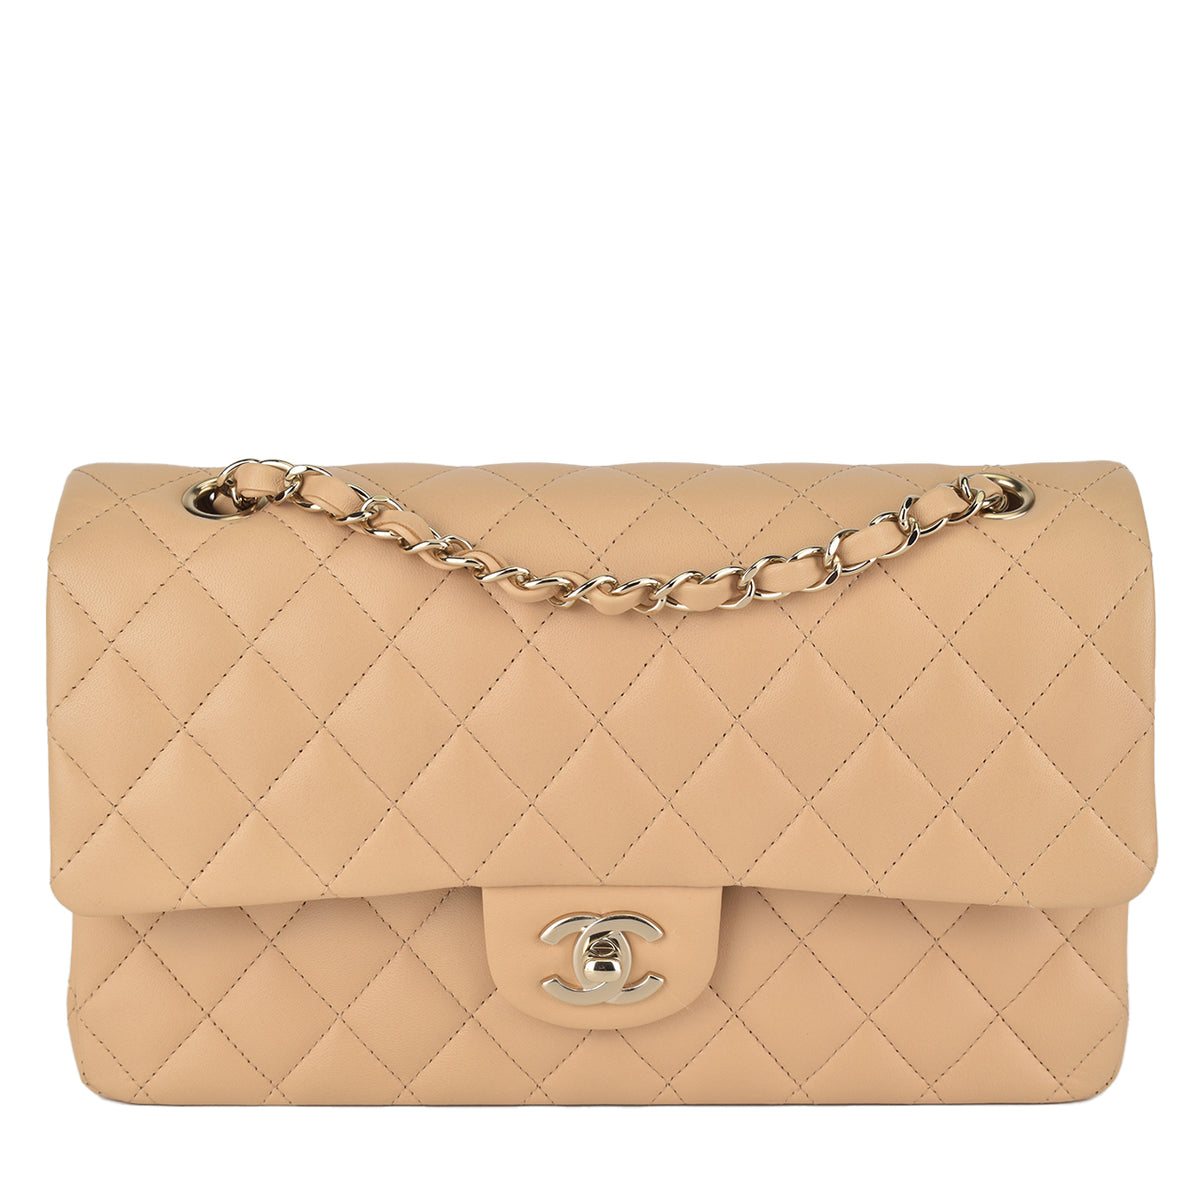 Chanel - authentic luxury pieces curated by Loveholic – Page 2